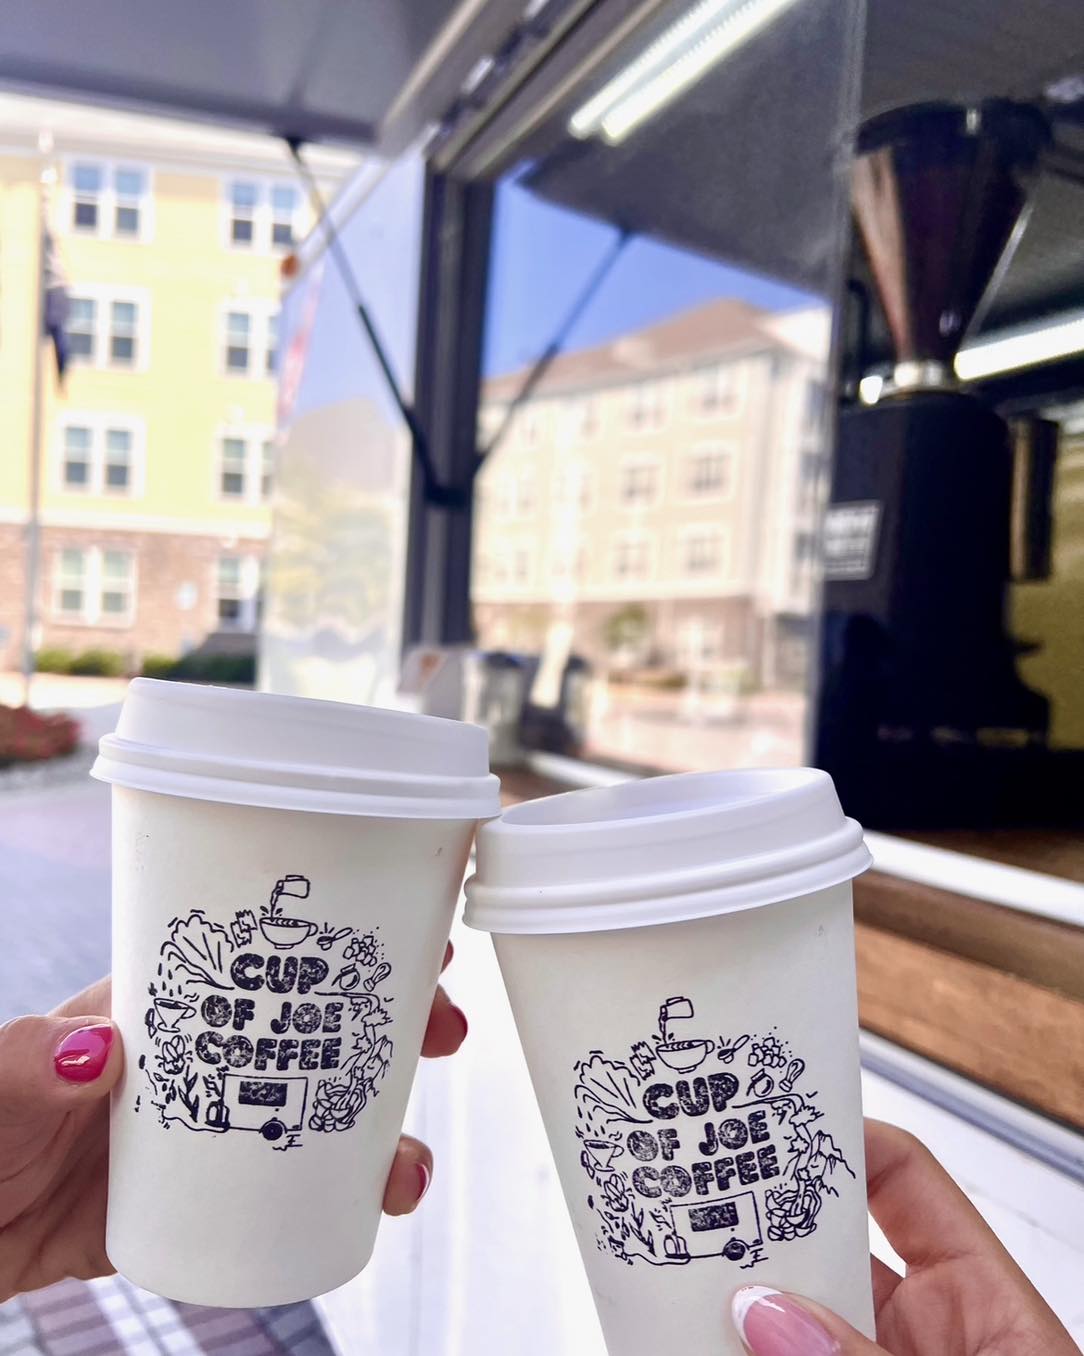 Two manicured hands cheers their to-go coffee cups, showing the "Cup of Joe Coffee" art.